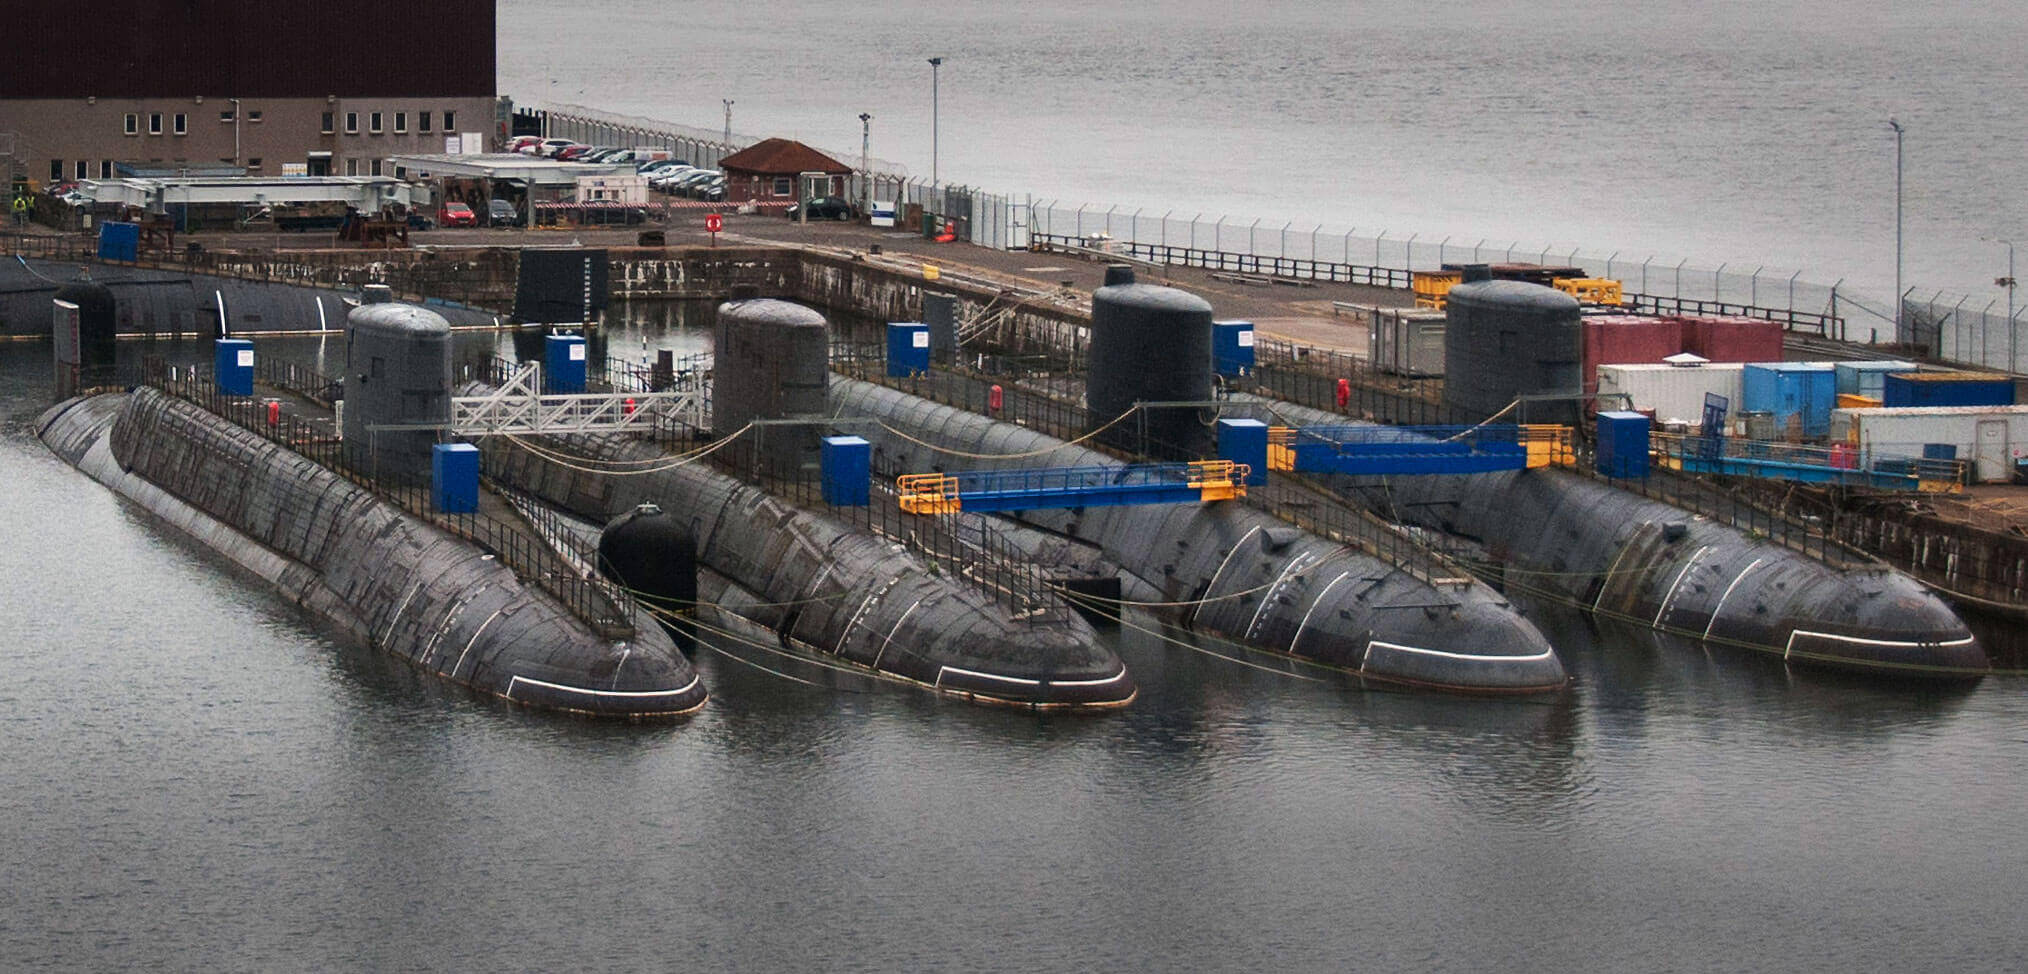 The painfully slow process of dismantling ex-Royal Navy nuclear submarines